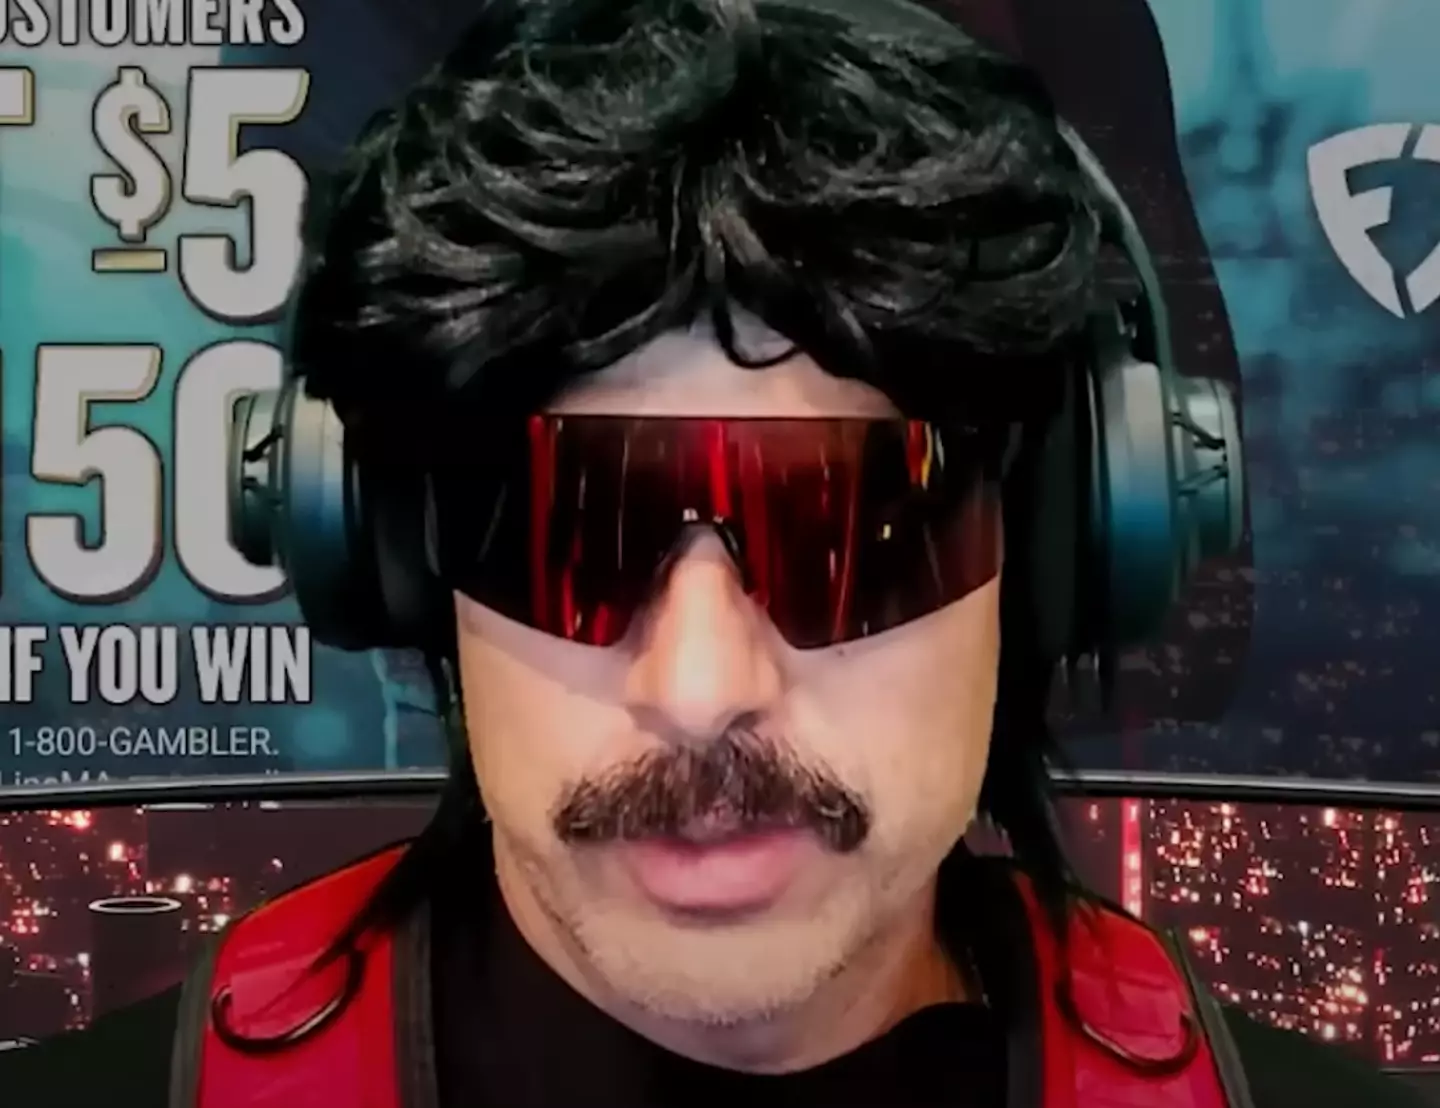 Dr DisRespect now streams on YouTube. (YouTube/Dr DisRespect)